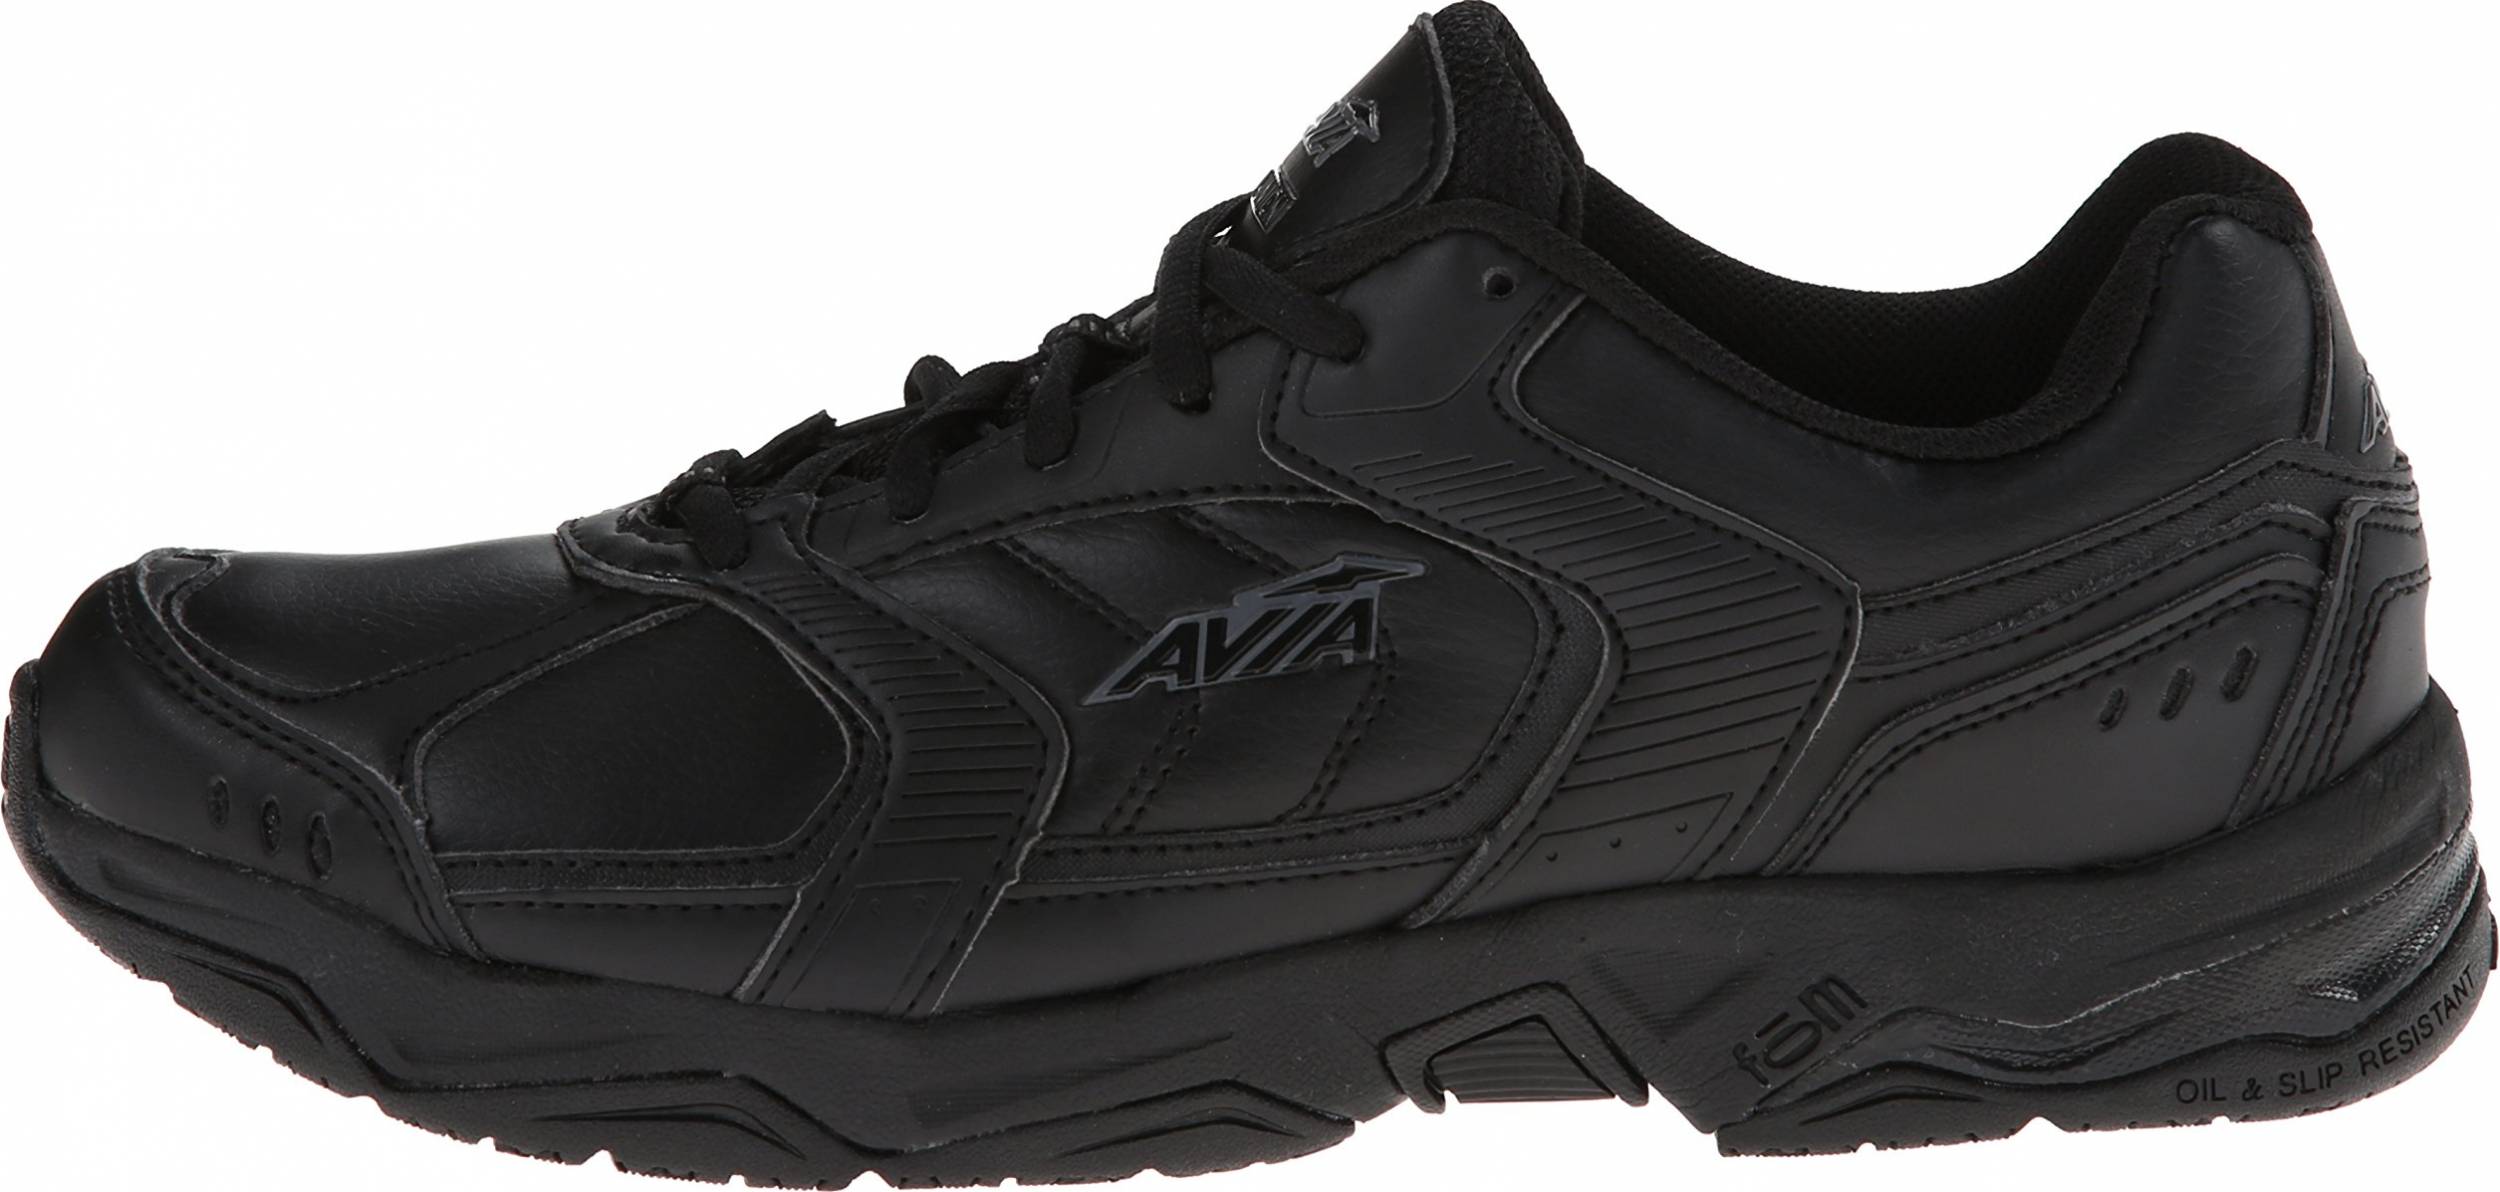 Save 32% on Avia Walking Shoes (3 